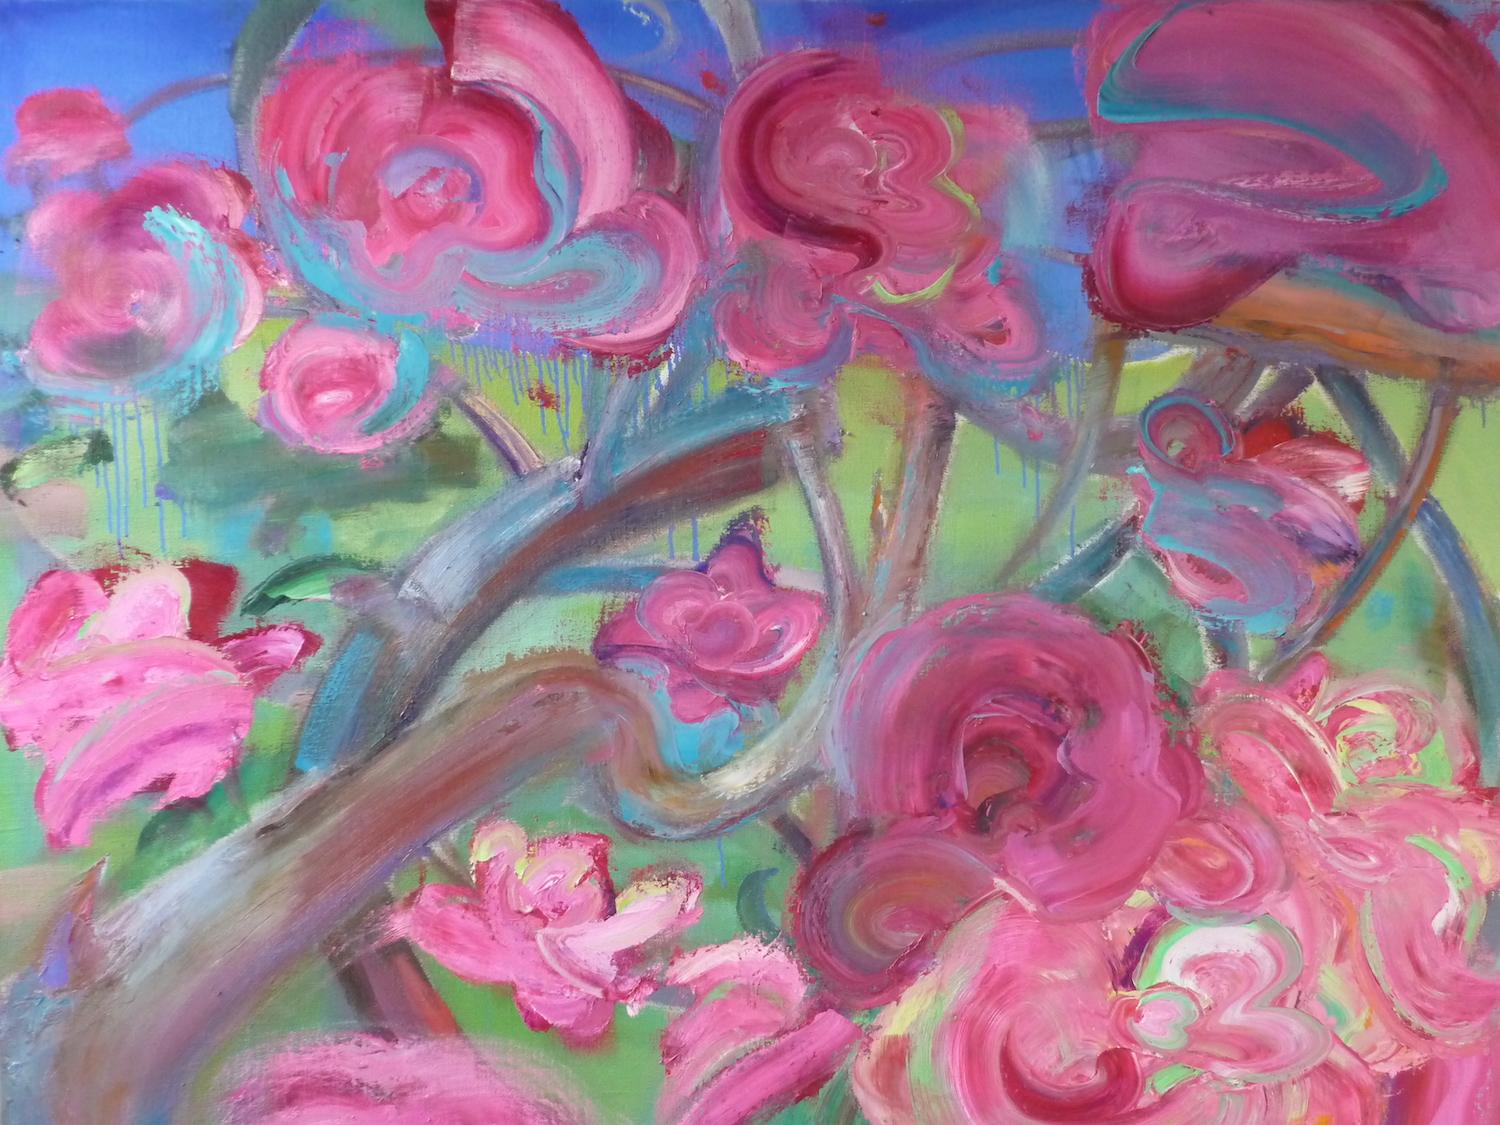 June by Christophe Dupety - Contemporary painting, Flora, Bright colours, Pink